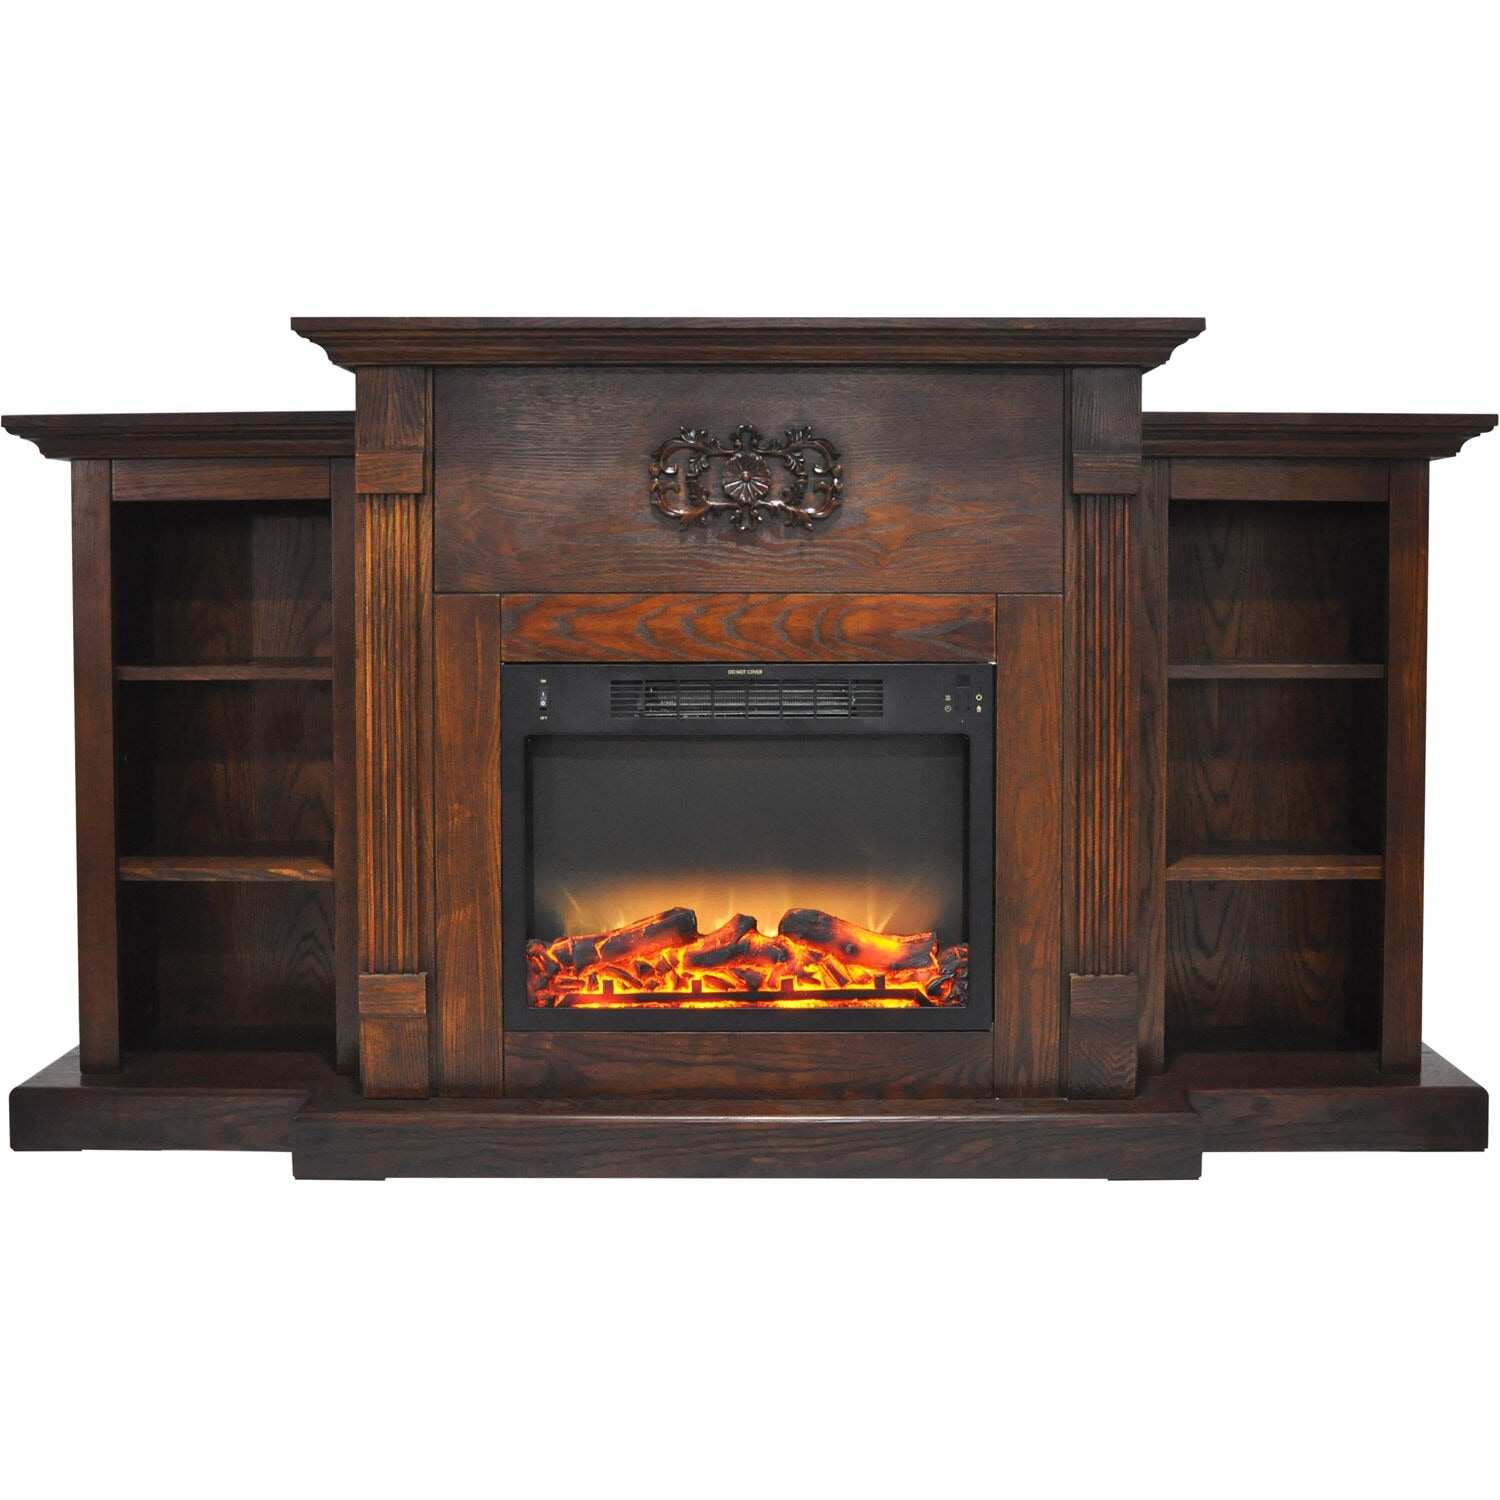 Hanover Classic 72 In. Electric Fireplace in Walnut with Built-in Bookshelves and an Enhanced Log Display